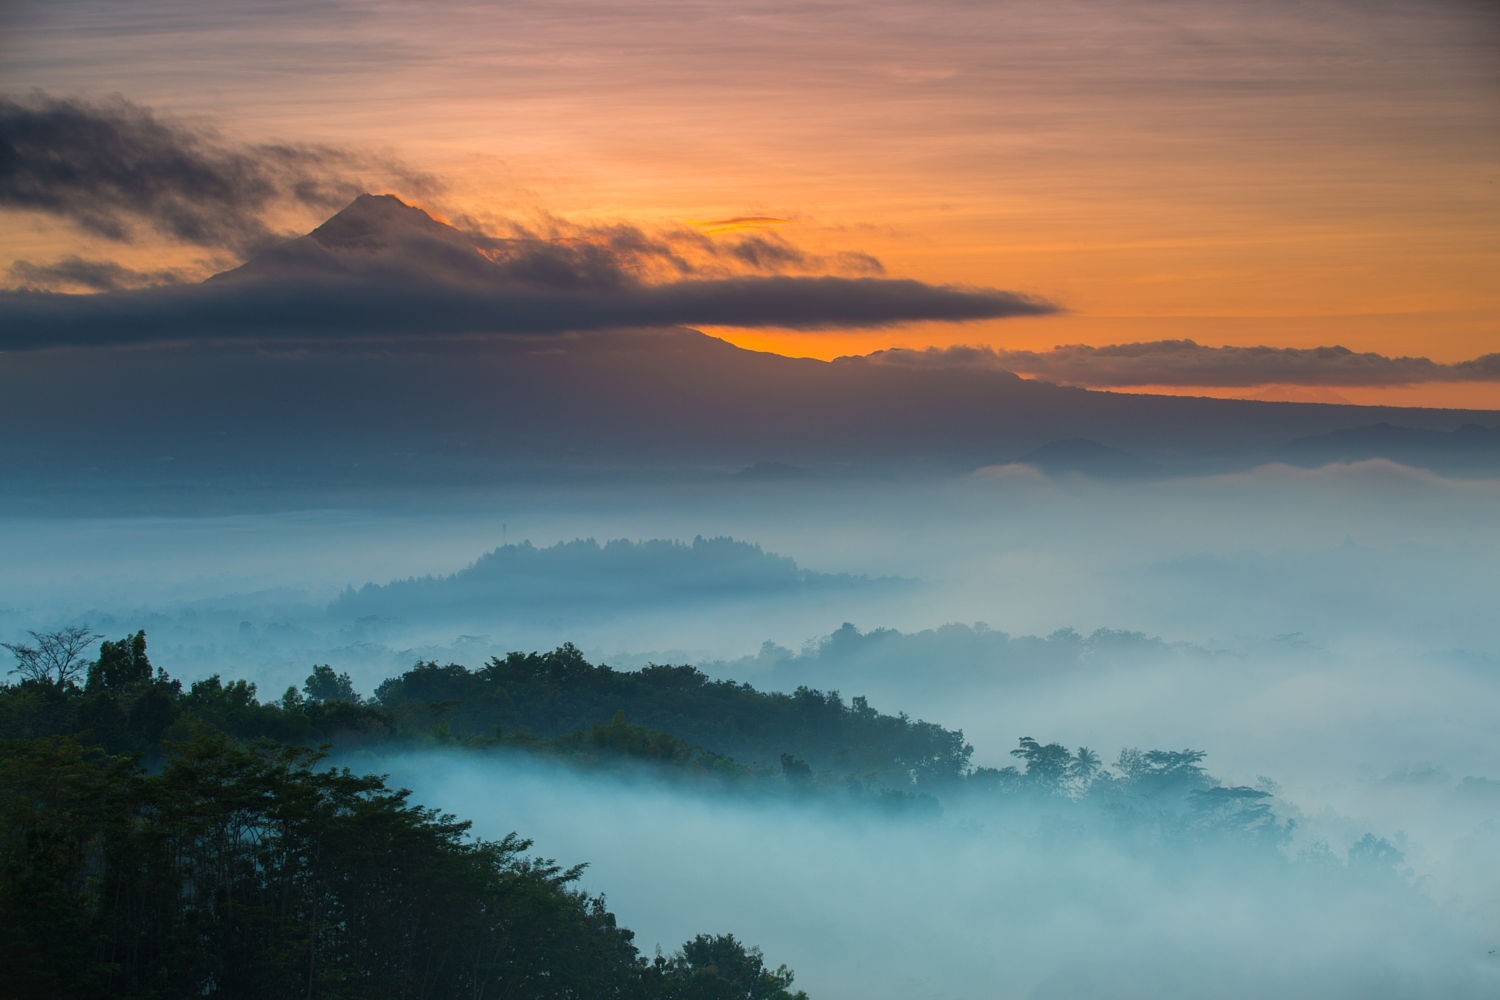 General 1500x1000 landscape photography nature sunrise volcano mist mountains hills valley clouds Indonesia Asia